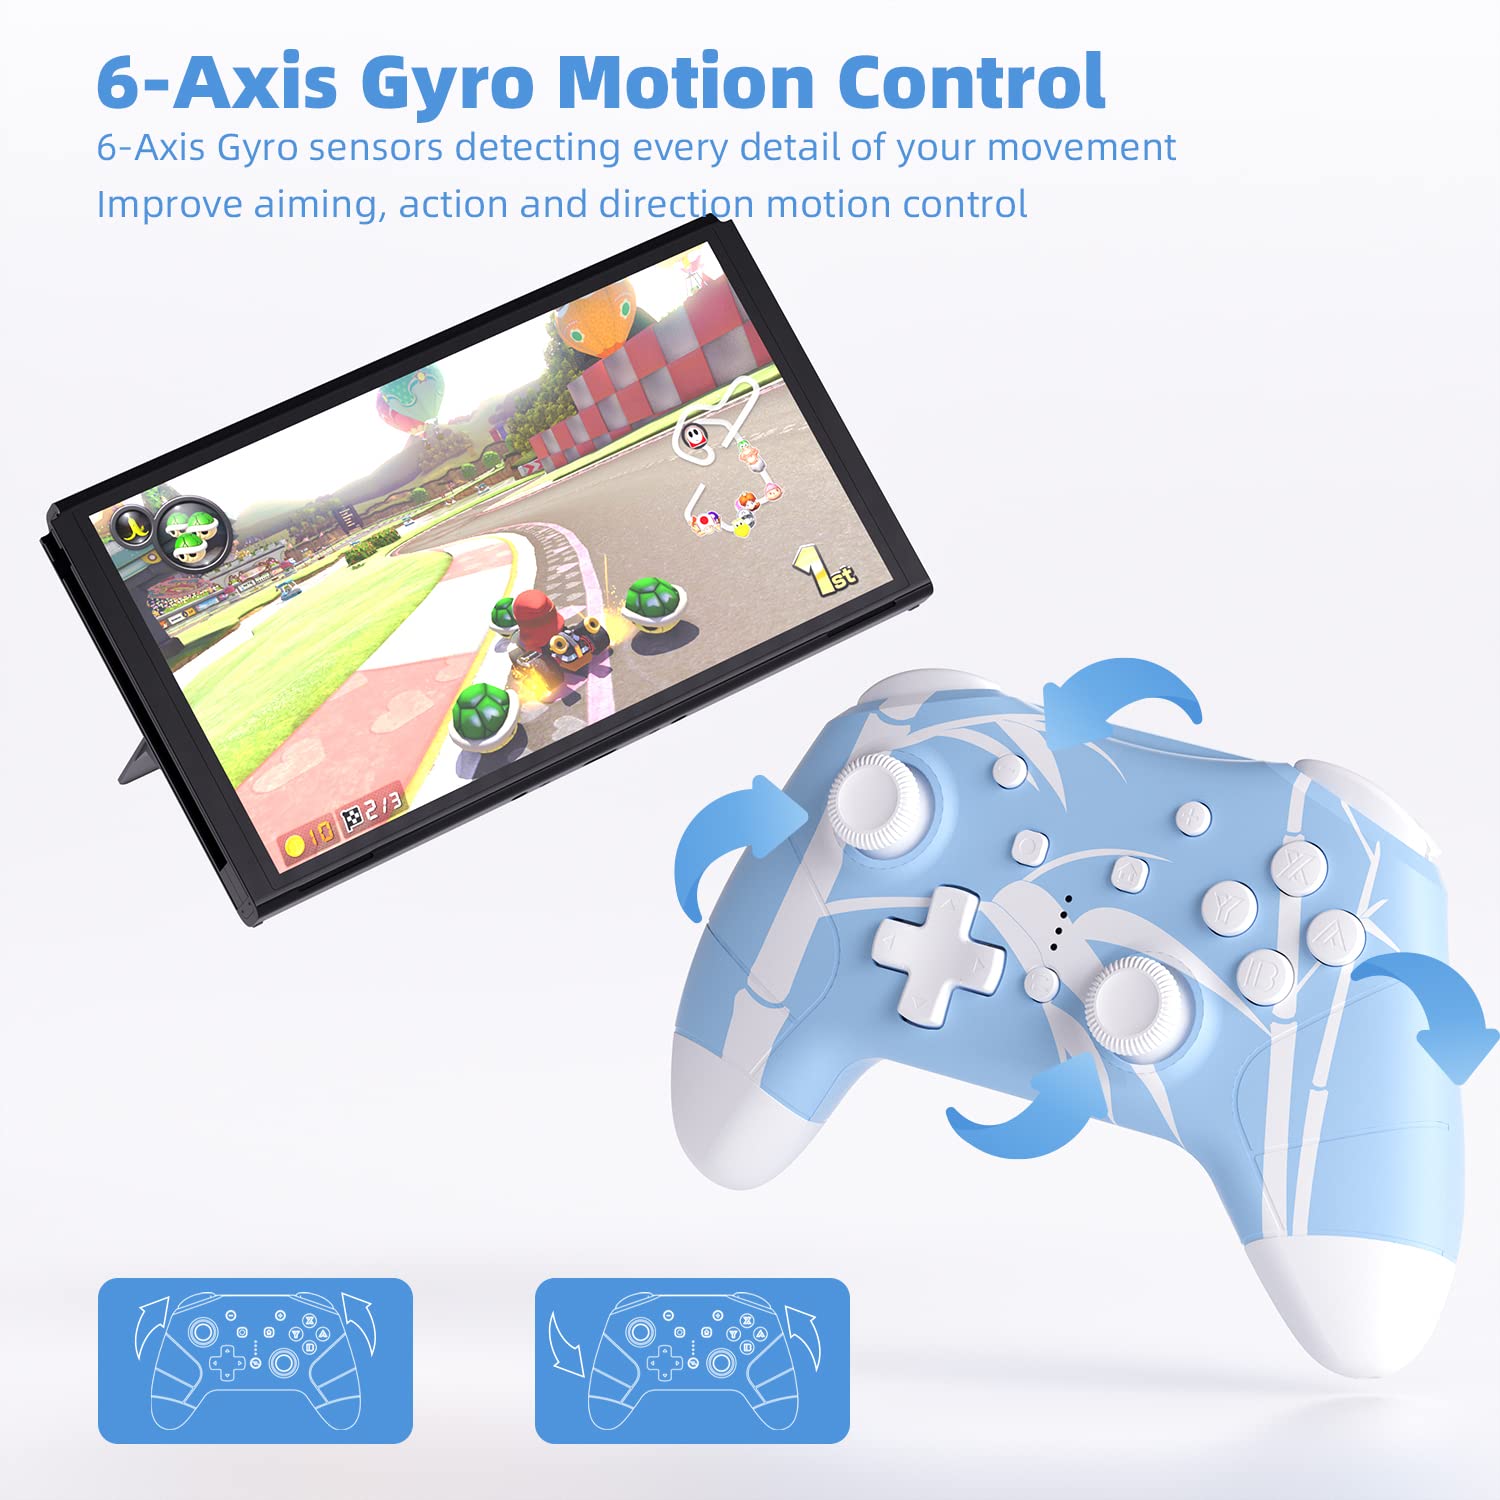 Mytrix Blue Bamboo Wireless Switch Pro Controller